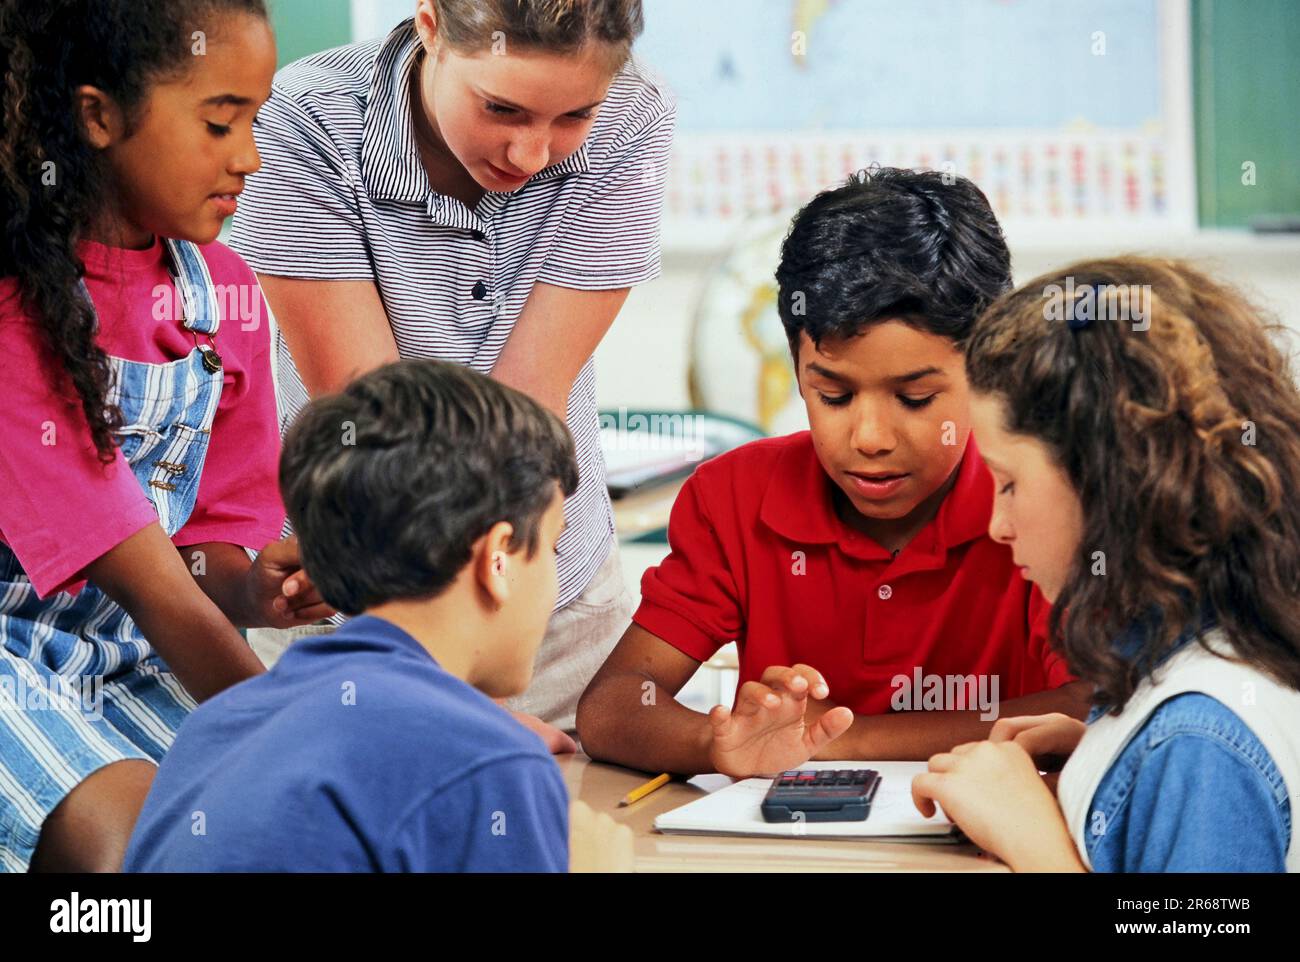 Mixed race elementary school students in math class using a calculator Stock Photo